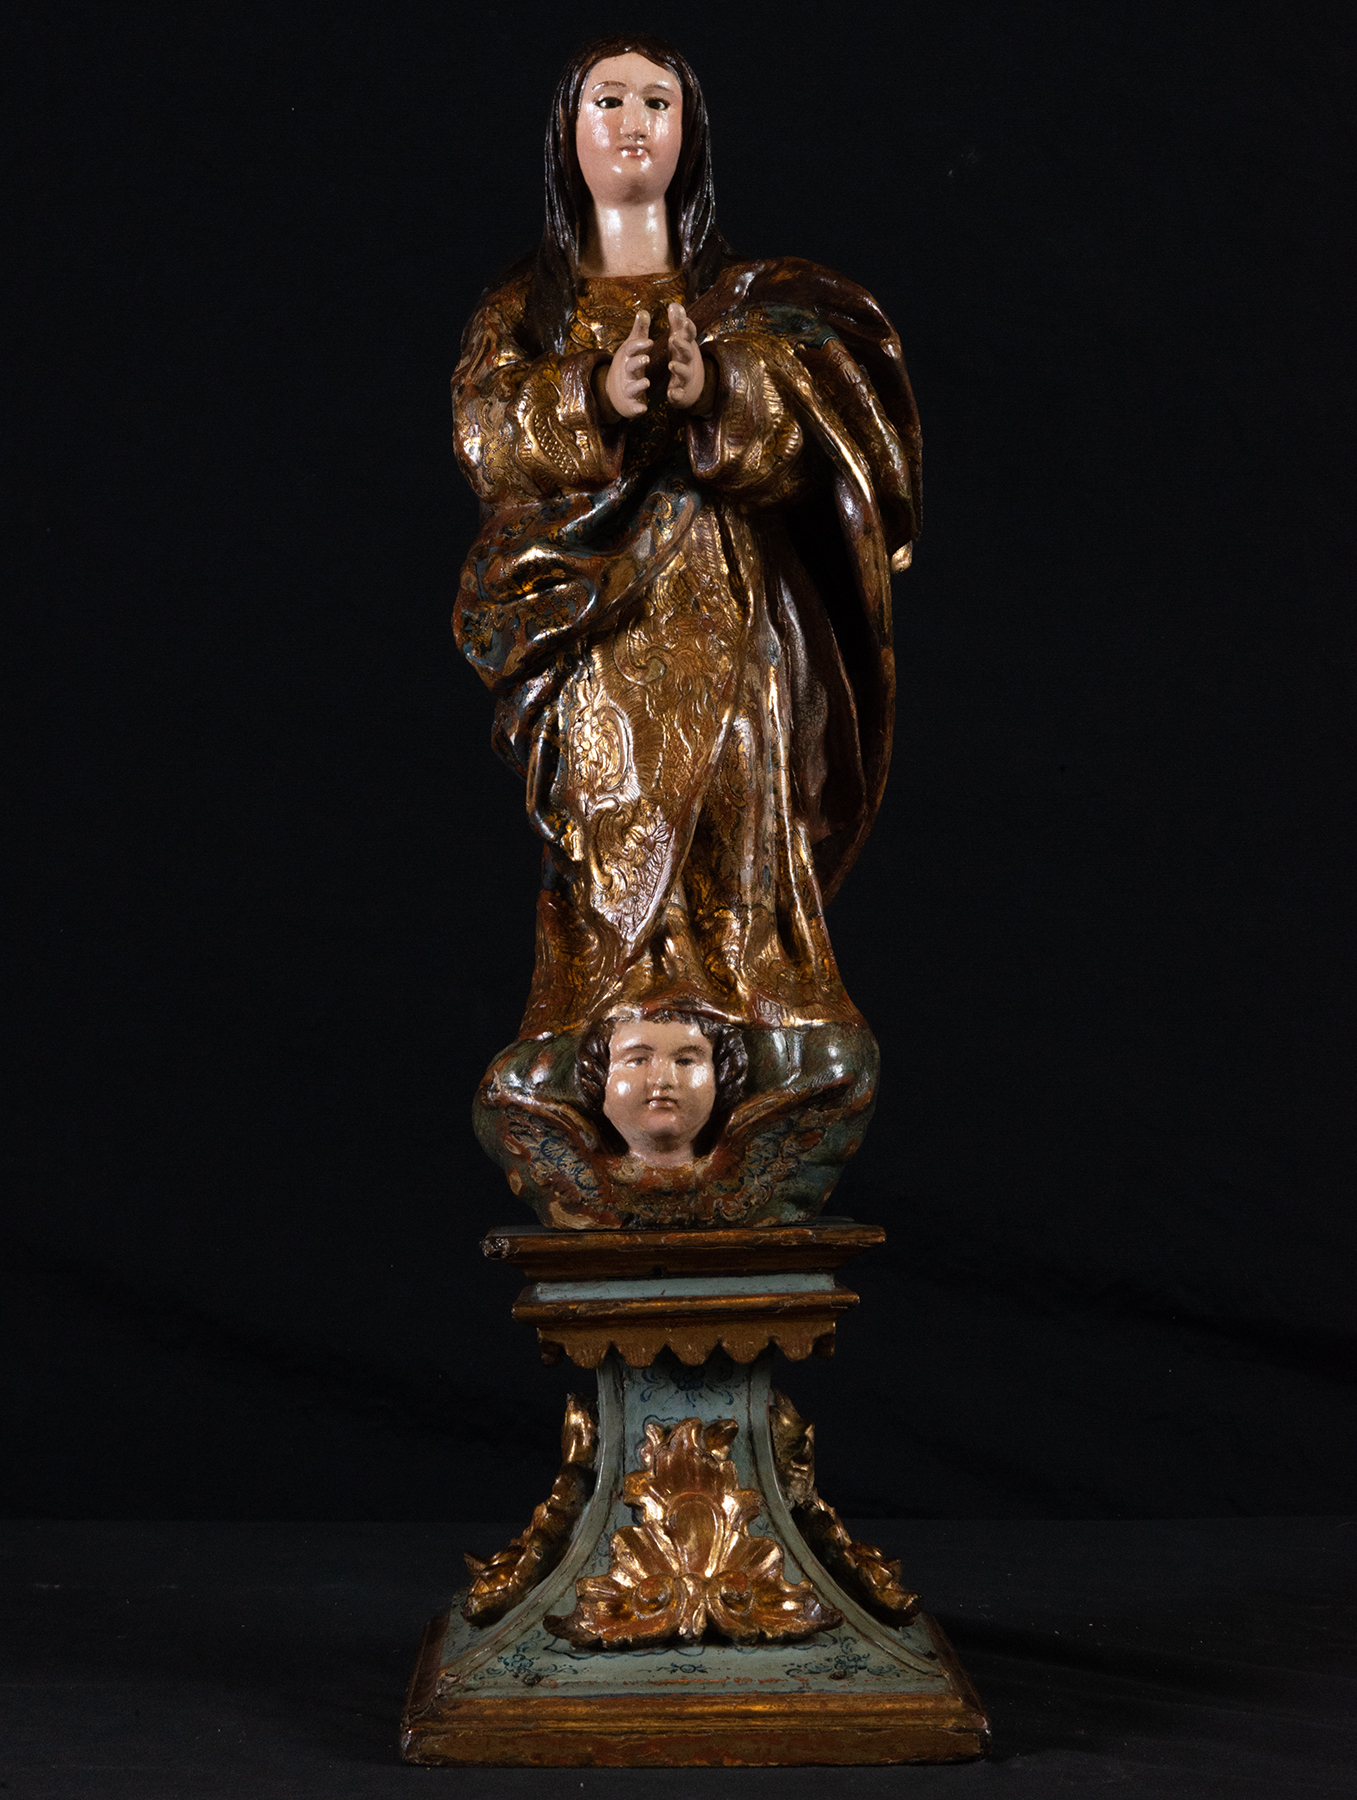 Immaculate Virgin of New Spain, 17th century Mexican colonial work, possibly Puebla